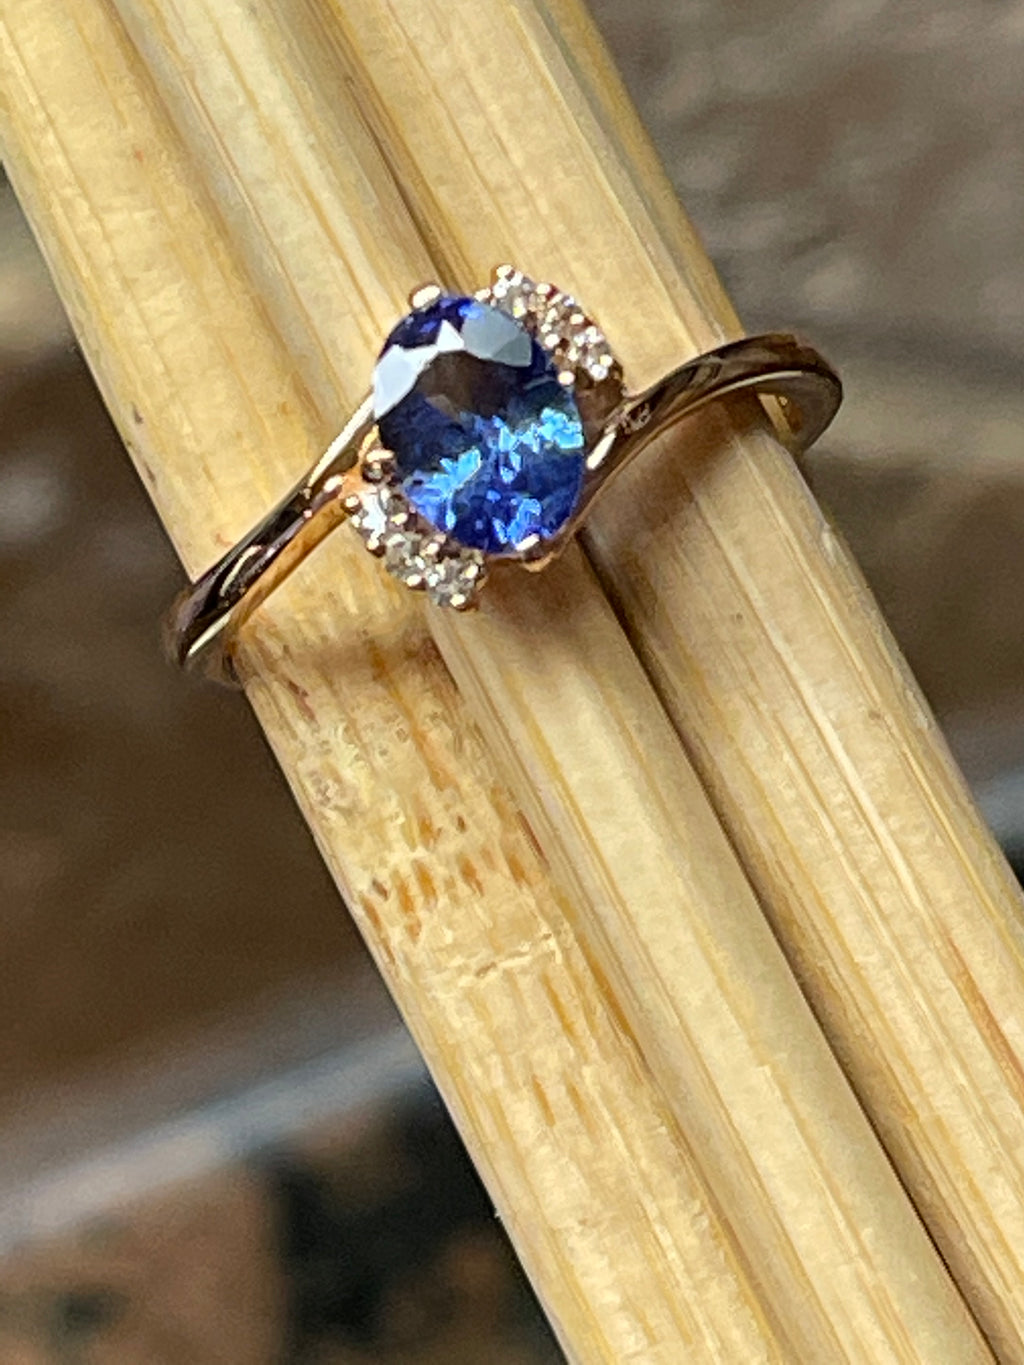 Genuine Blue Tanzanite, White Topaz 14k Rose Gold Over Sterling Silver Engagement Ring Size 5, 6, 7, 8, 9 - Natural Rocks by Kala